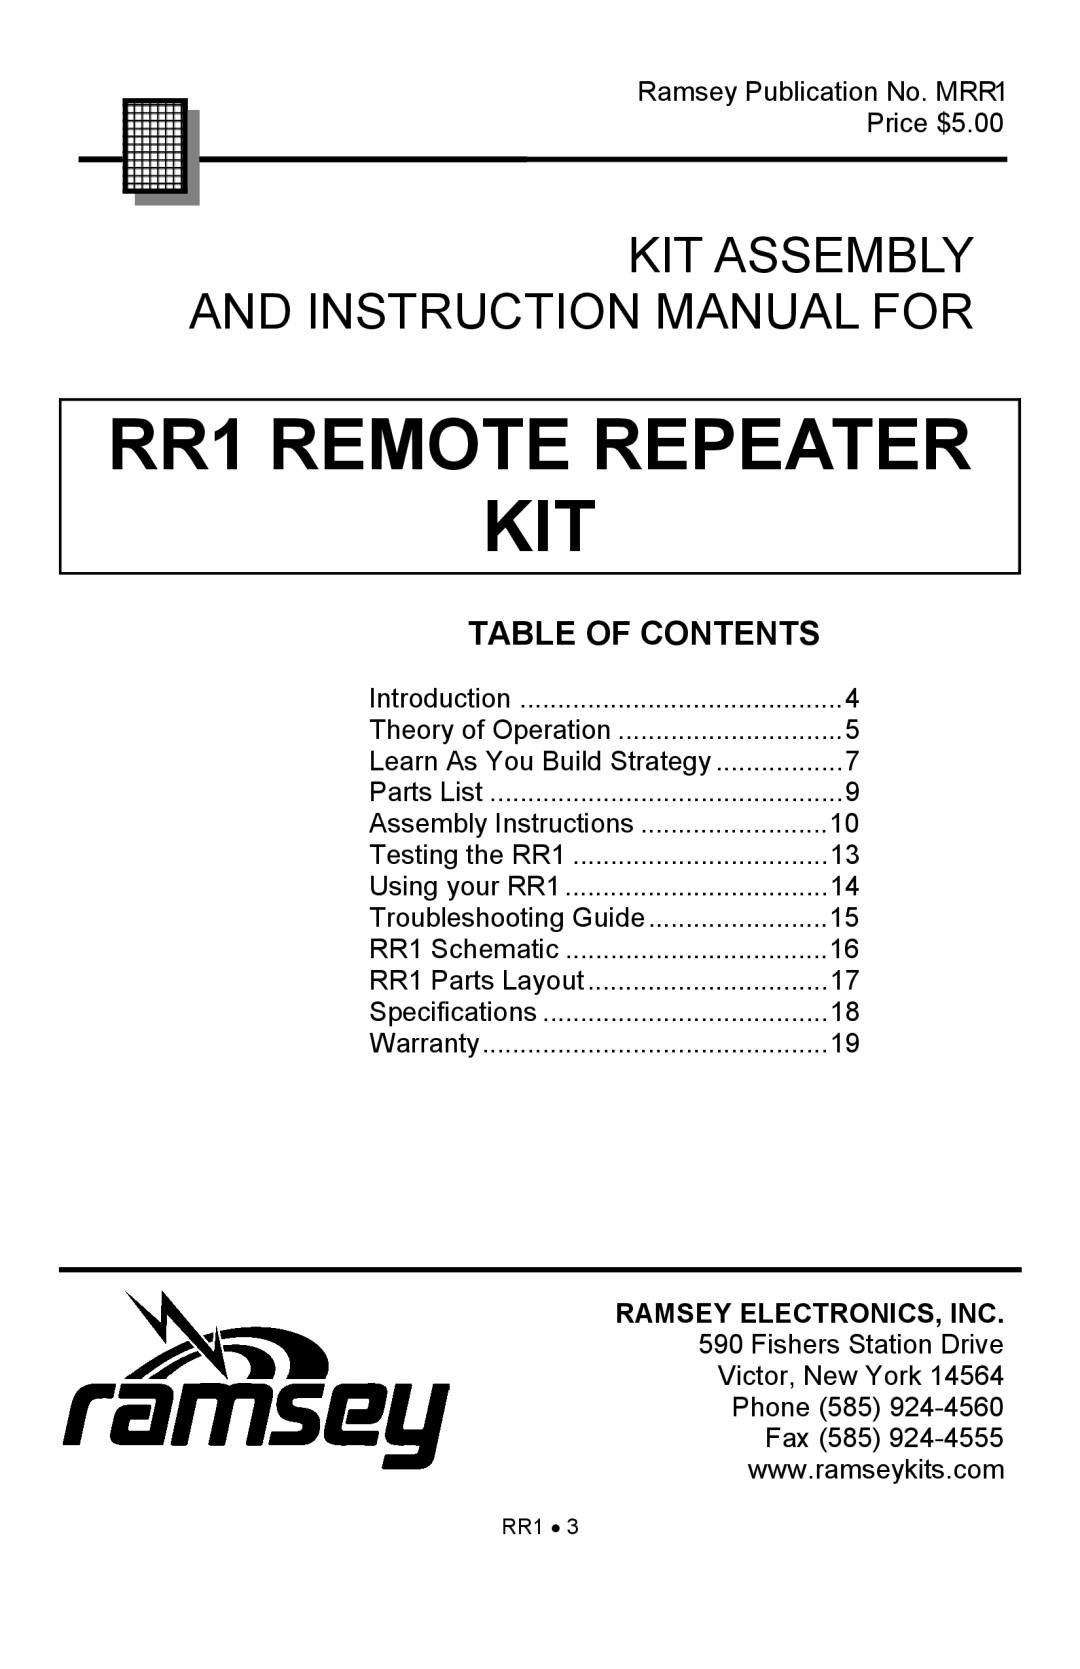 Ramsey Electronics manual RR1 REMOTE REPEATER KIT, Kit Assembly And Instruction Manual For, Table Of Contents 